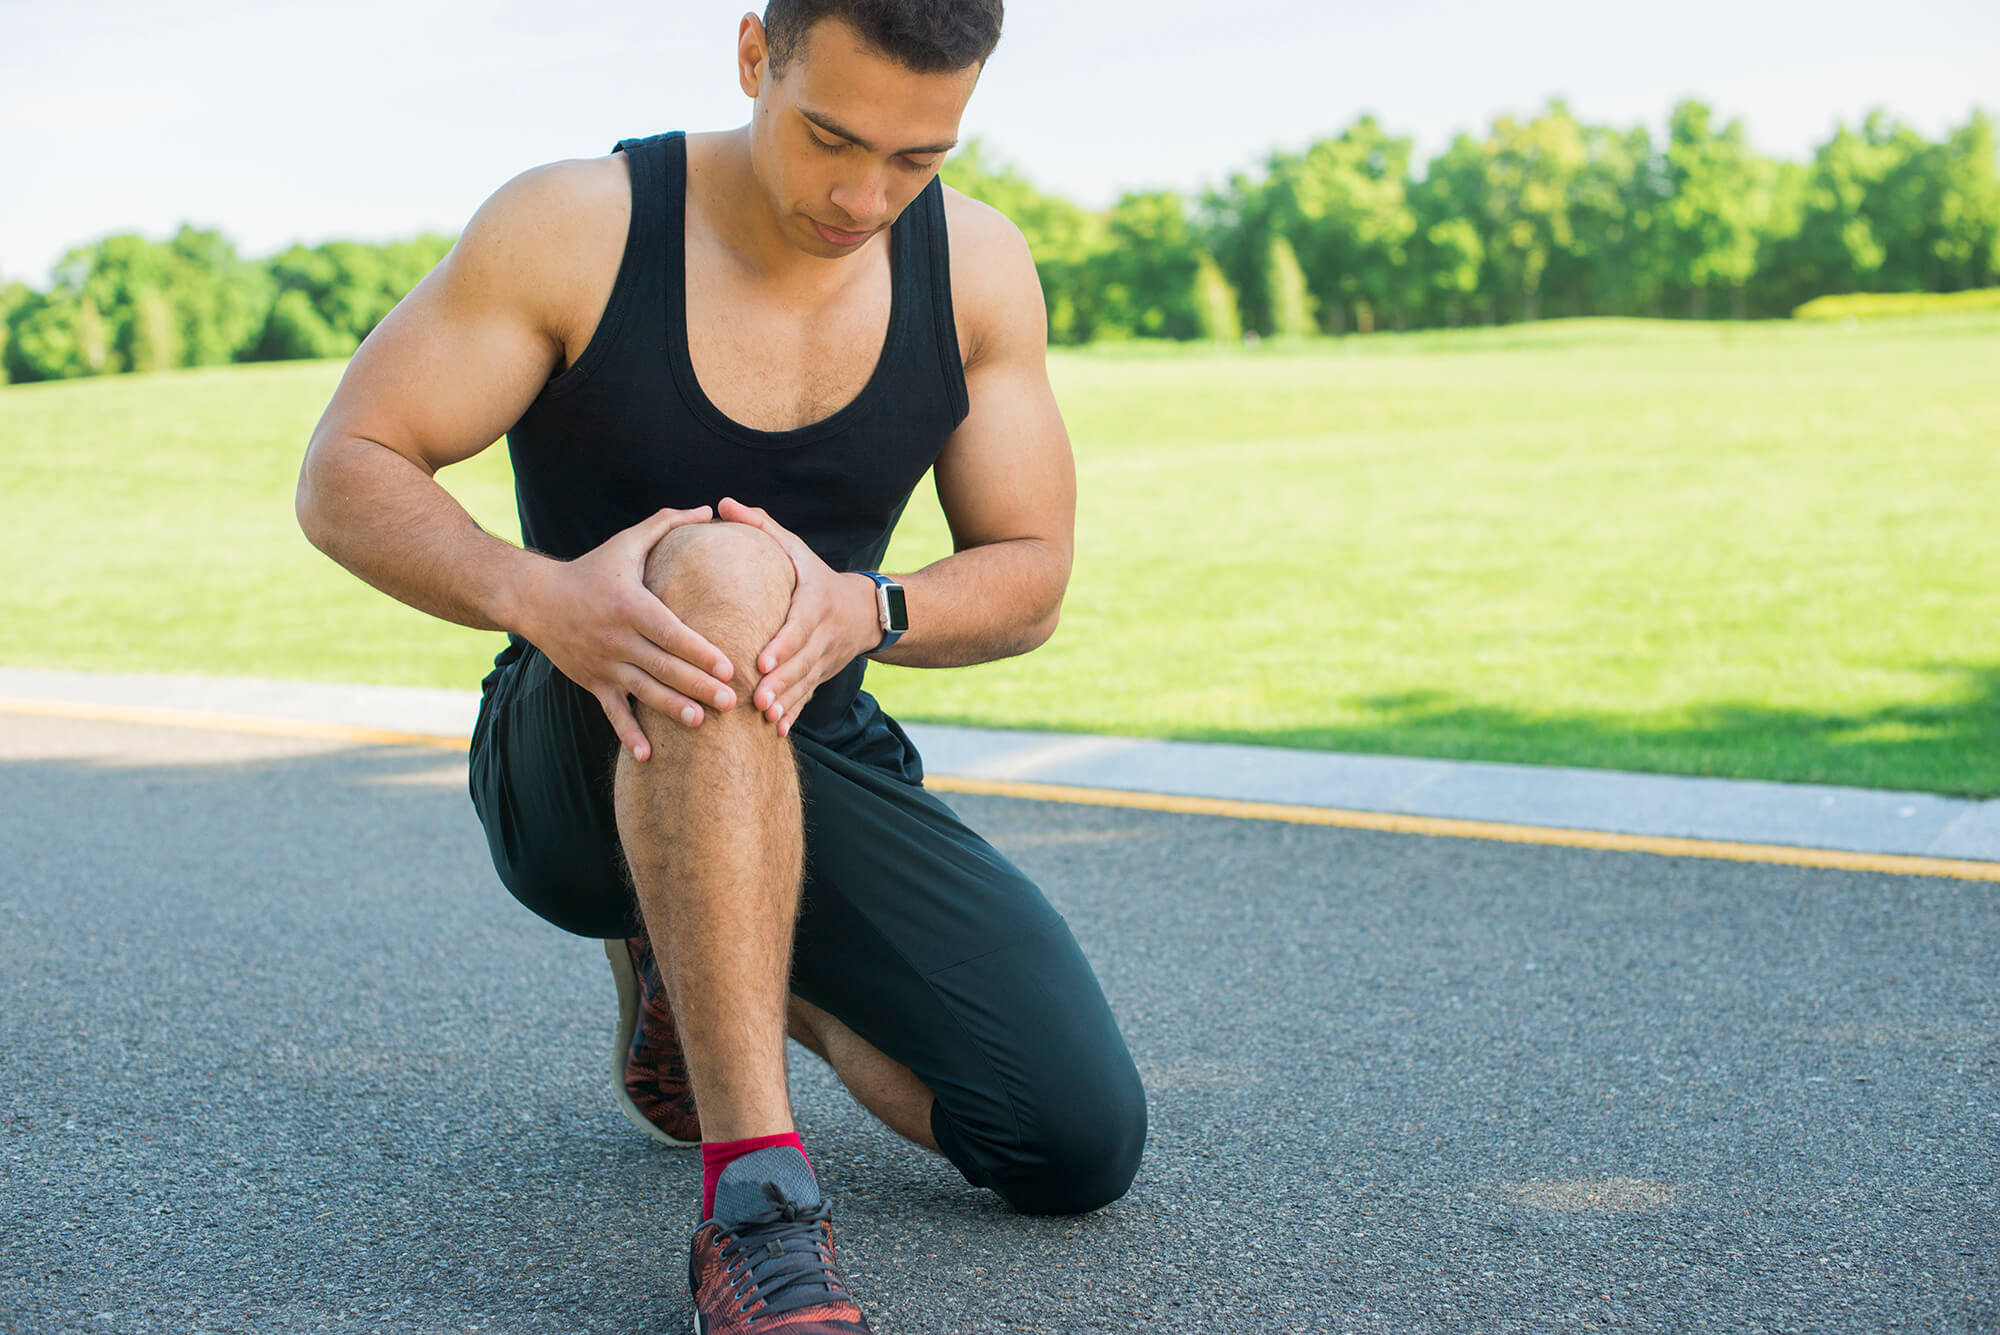 Tips for Keeping Your Knees in Good Condition